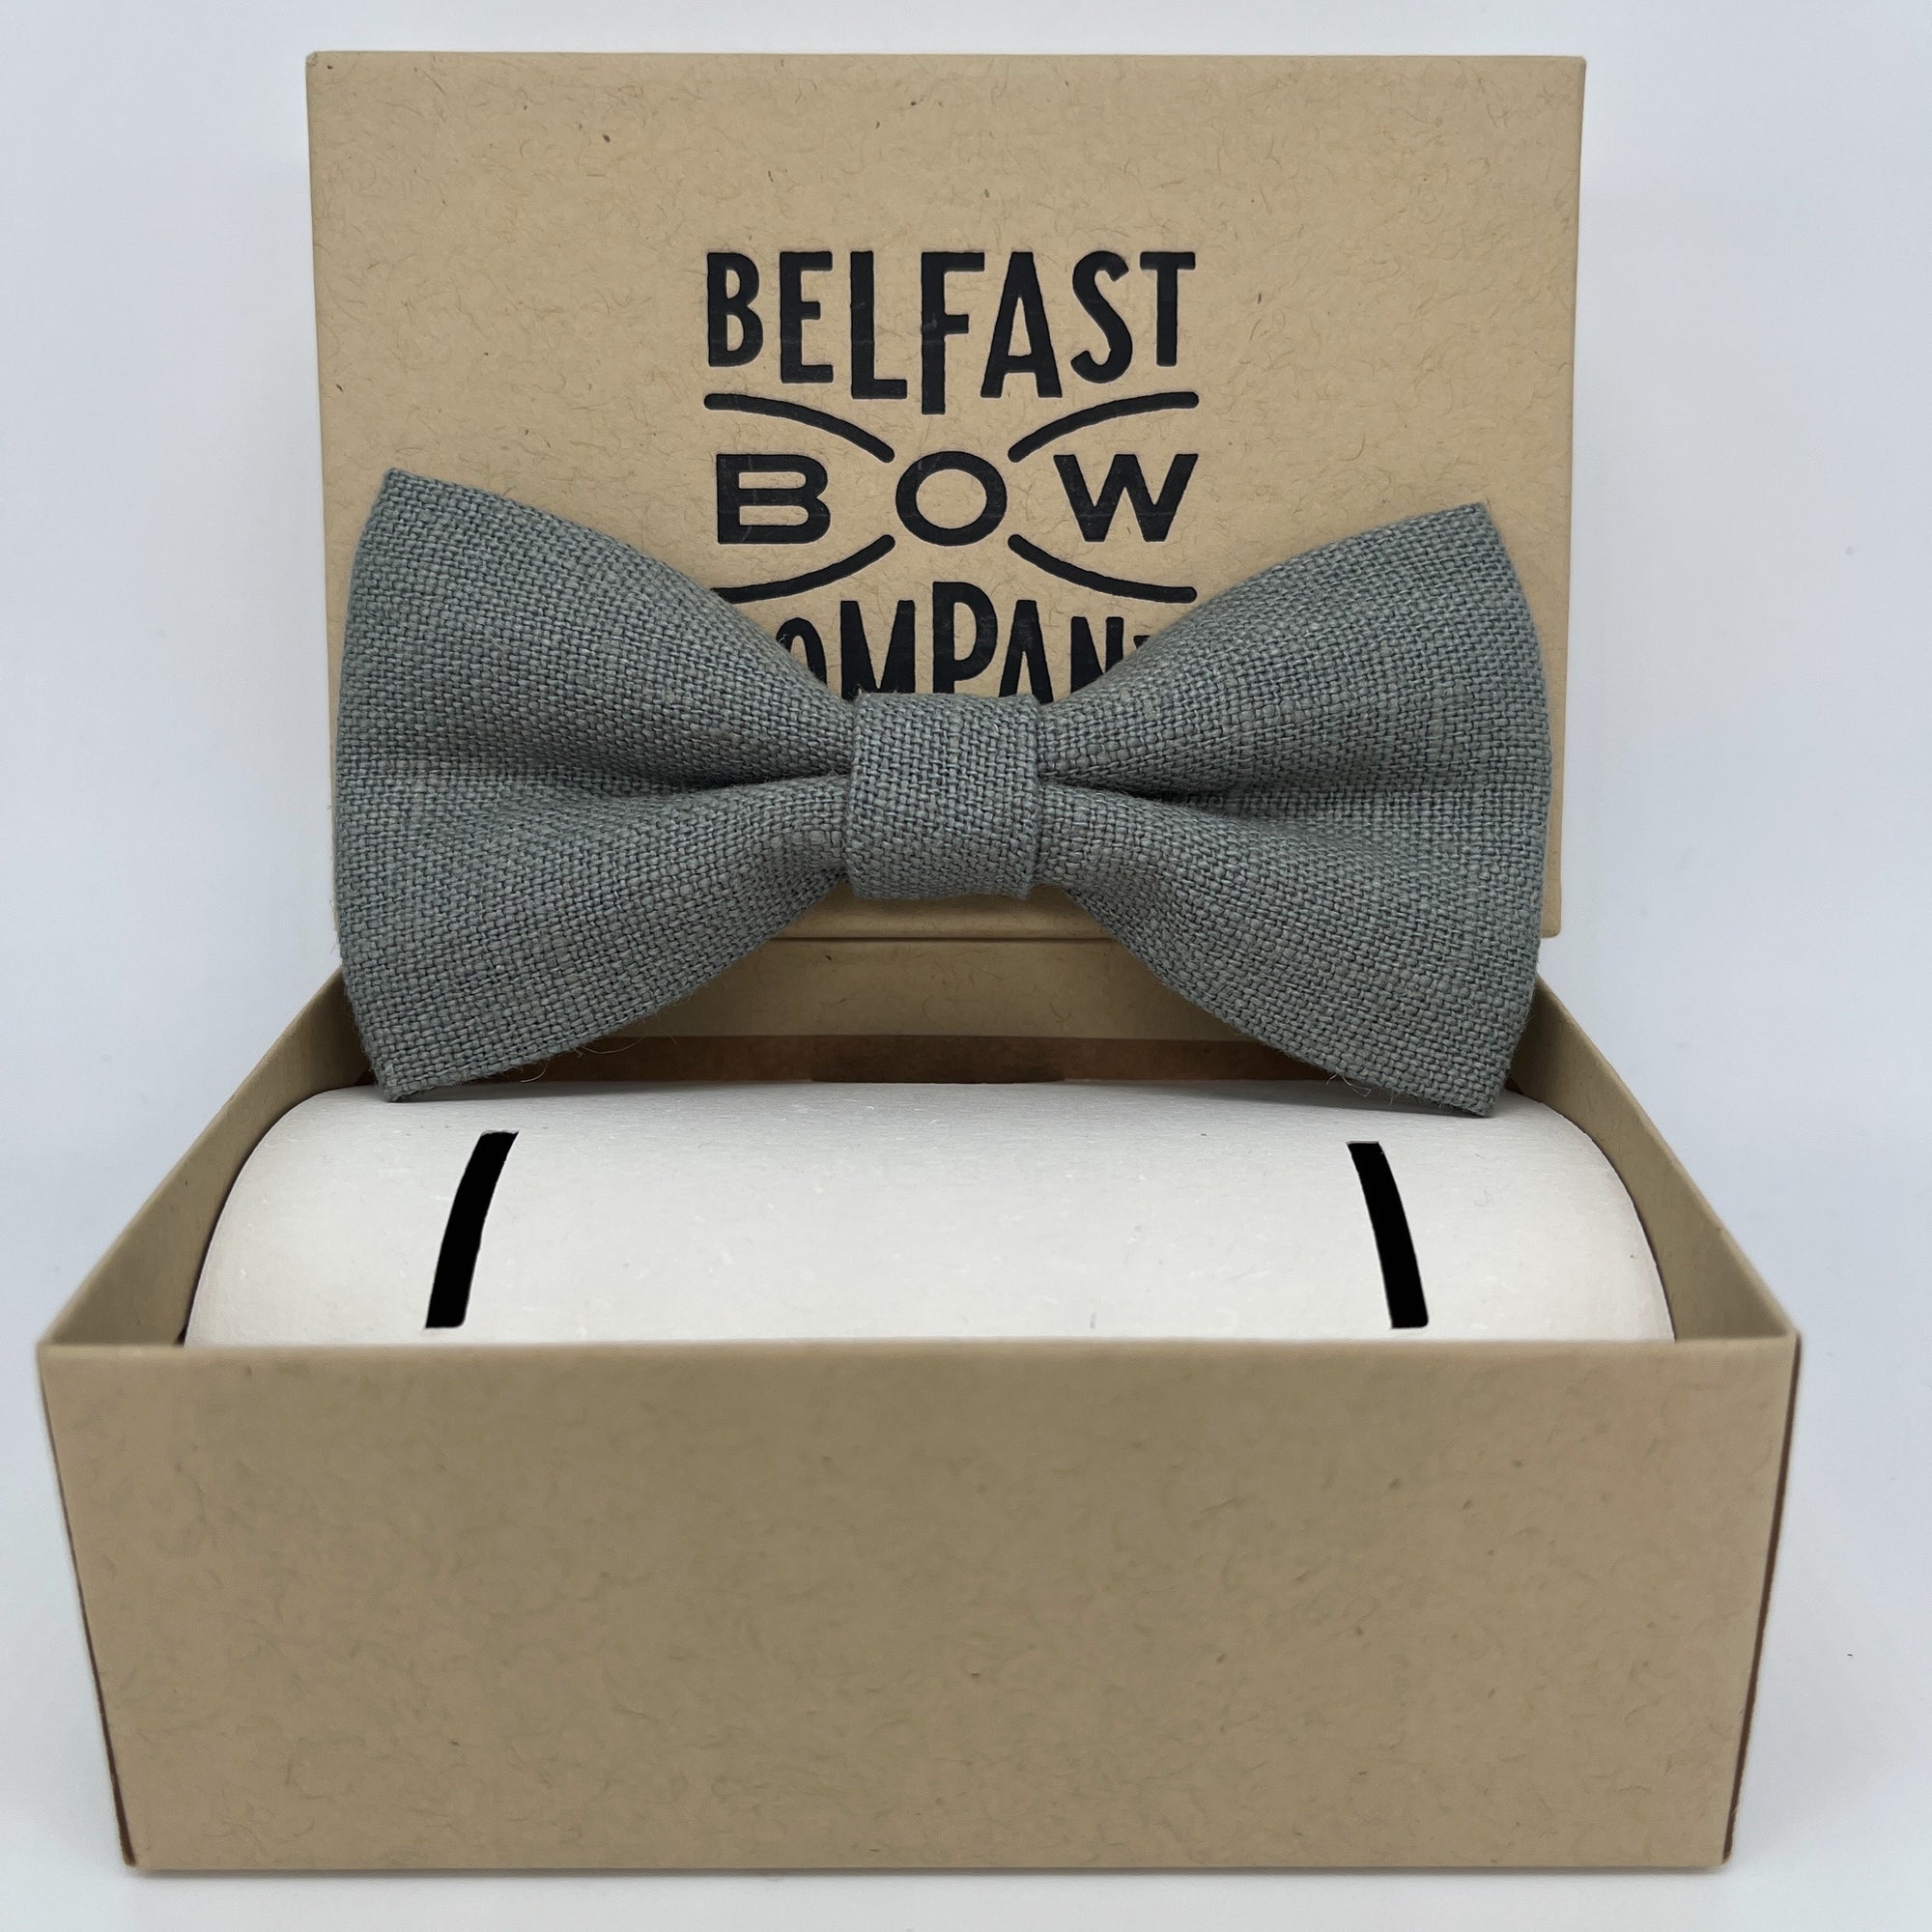 Irish Linen Bow Tie in Antique Sage by the Belfast Bow Company